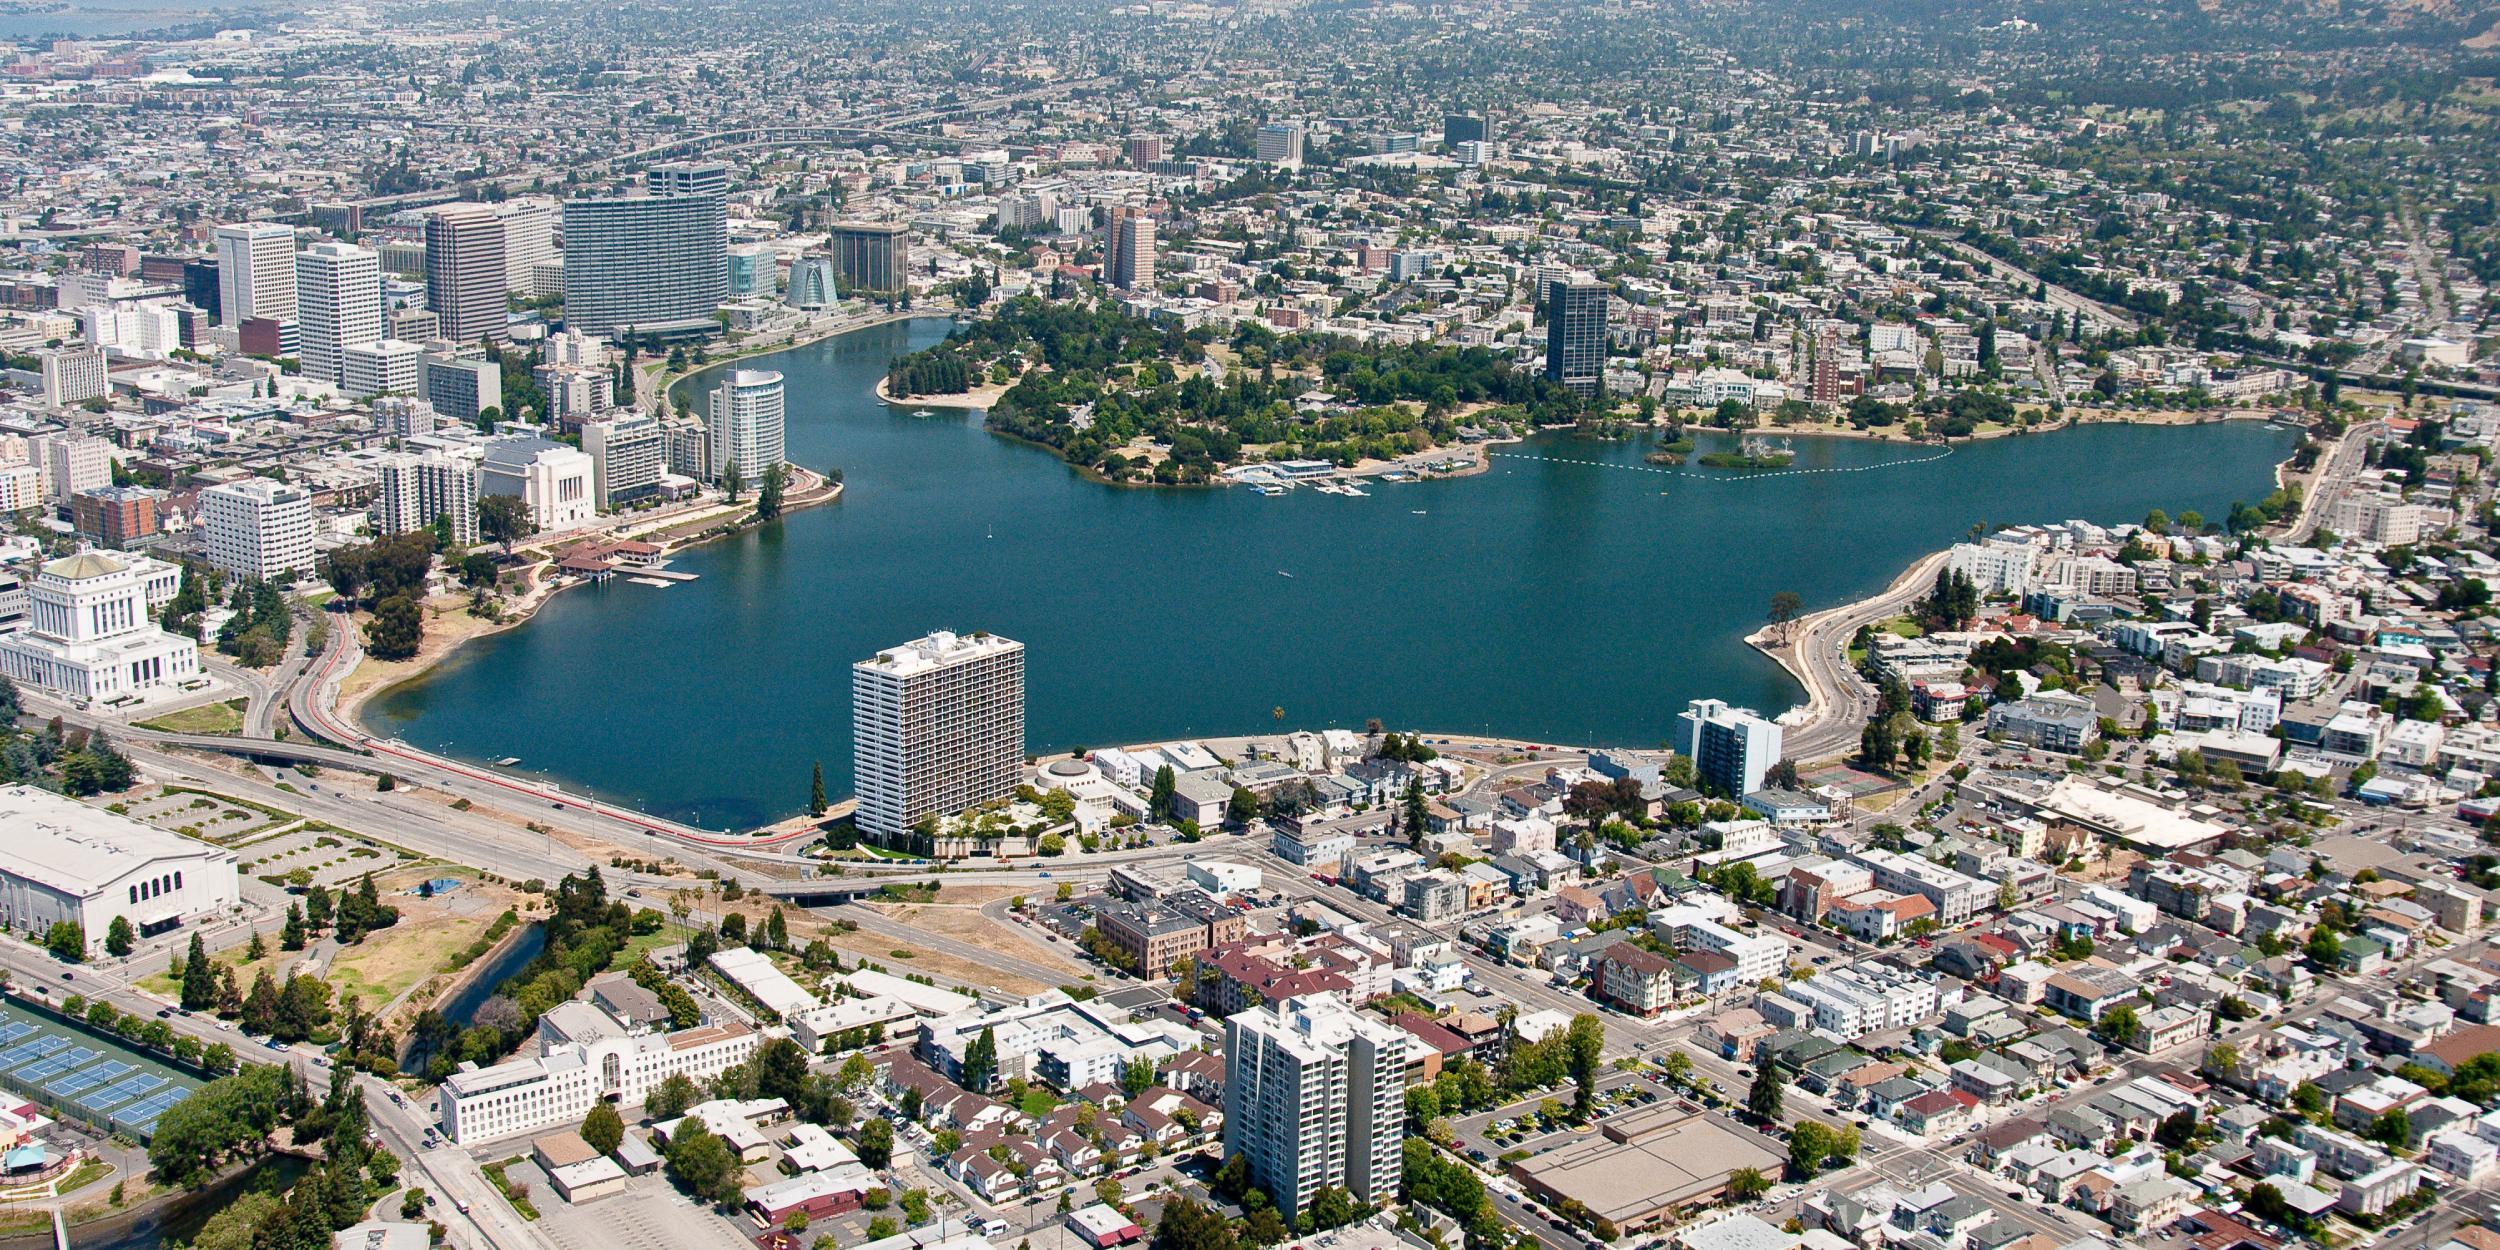 An aerial view of Lake Merritt in the centre of Oakland